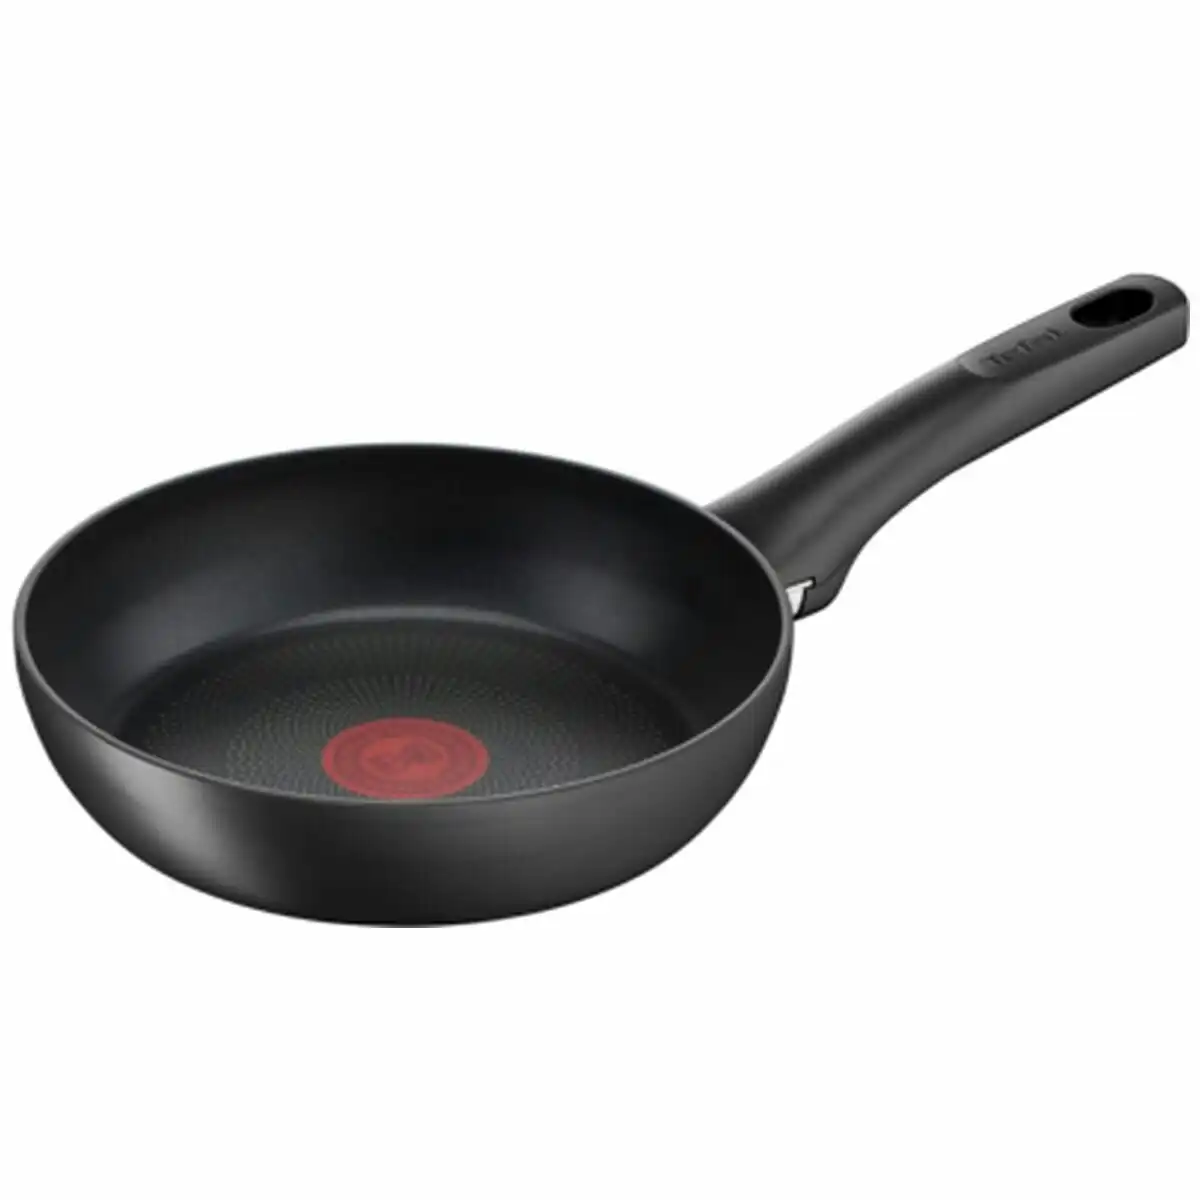 Tefal Ultimate Non-stick Induction Frypan 20cm